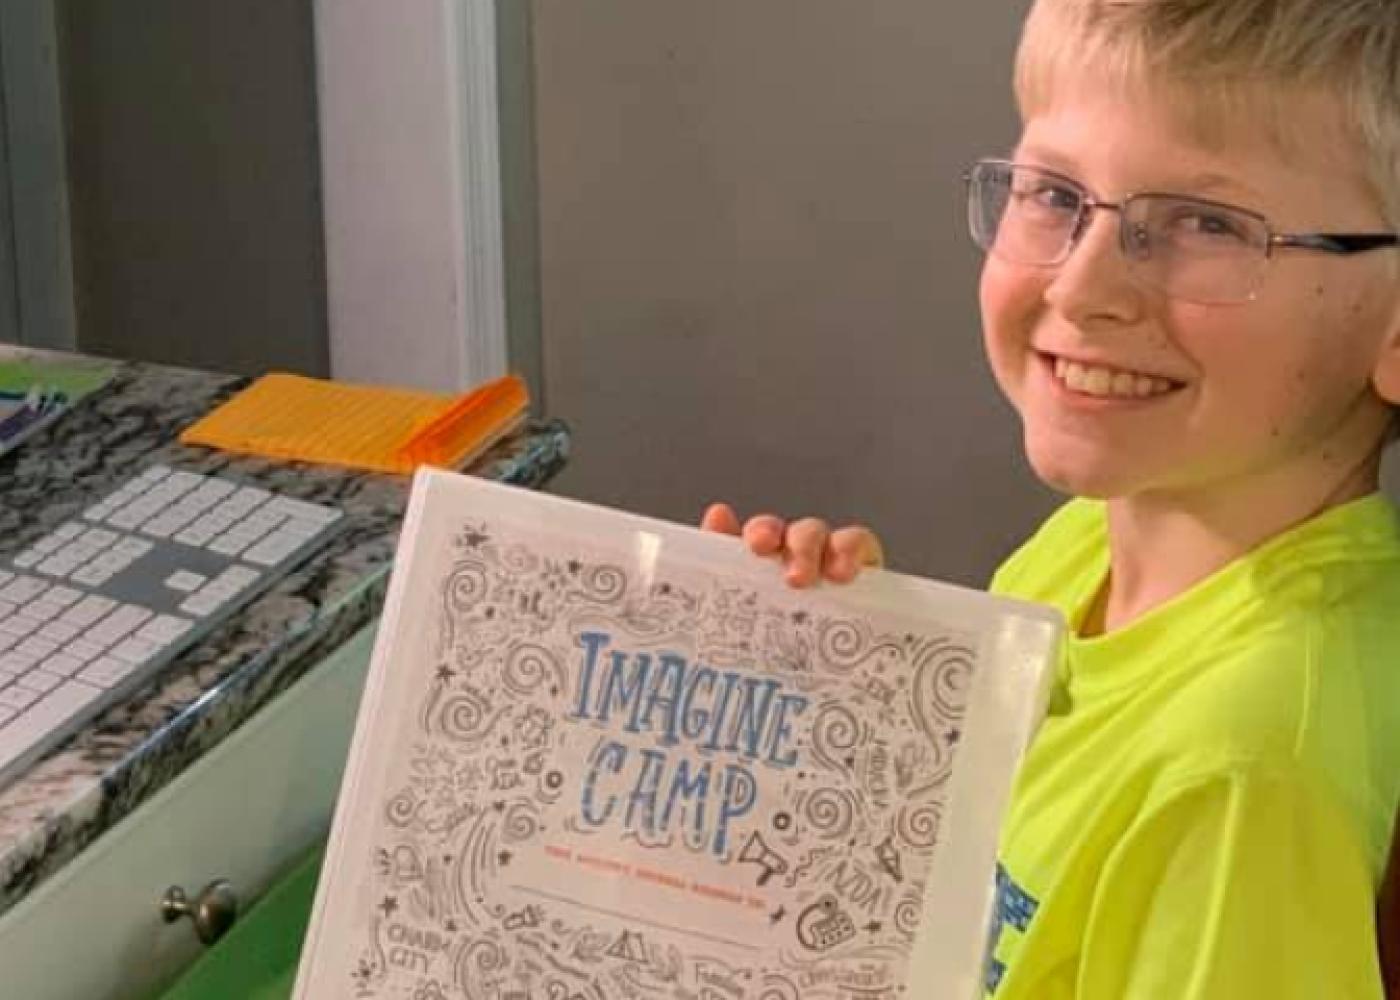 Blond boy with glasses in yellow shirt holding imagine camp piece of paper